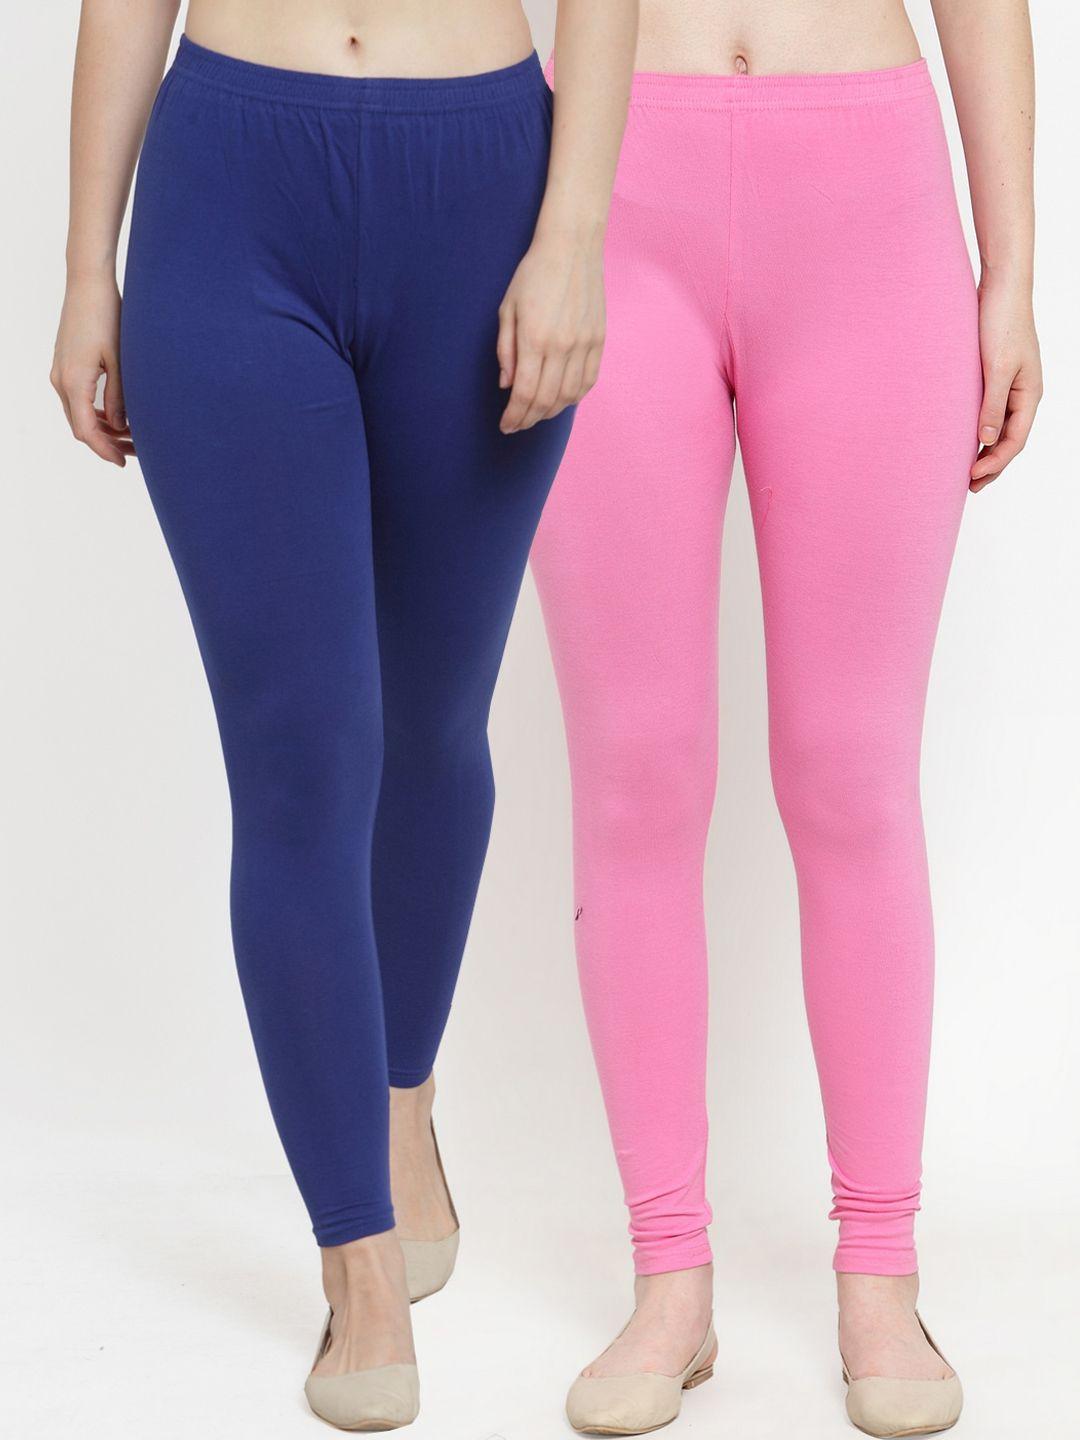 gracit-women-pack-of-2-blue-and-pink-solid-ankle-length-leggings